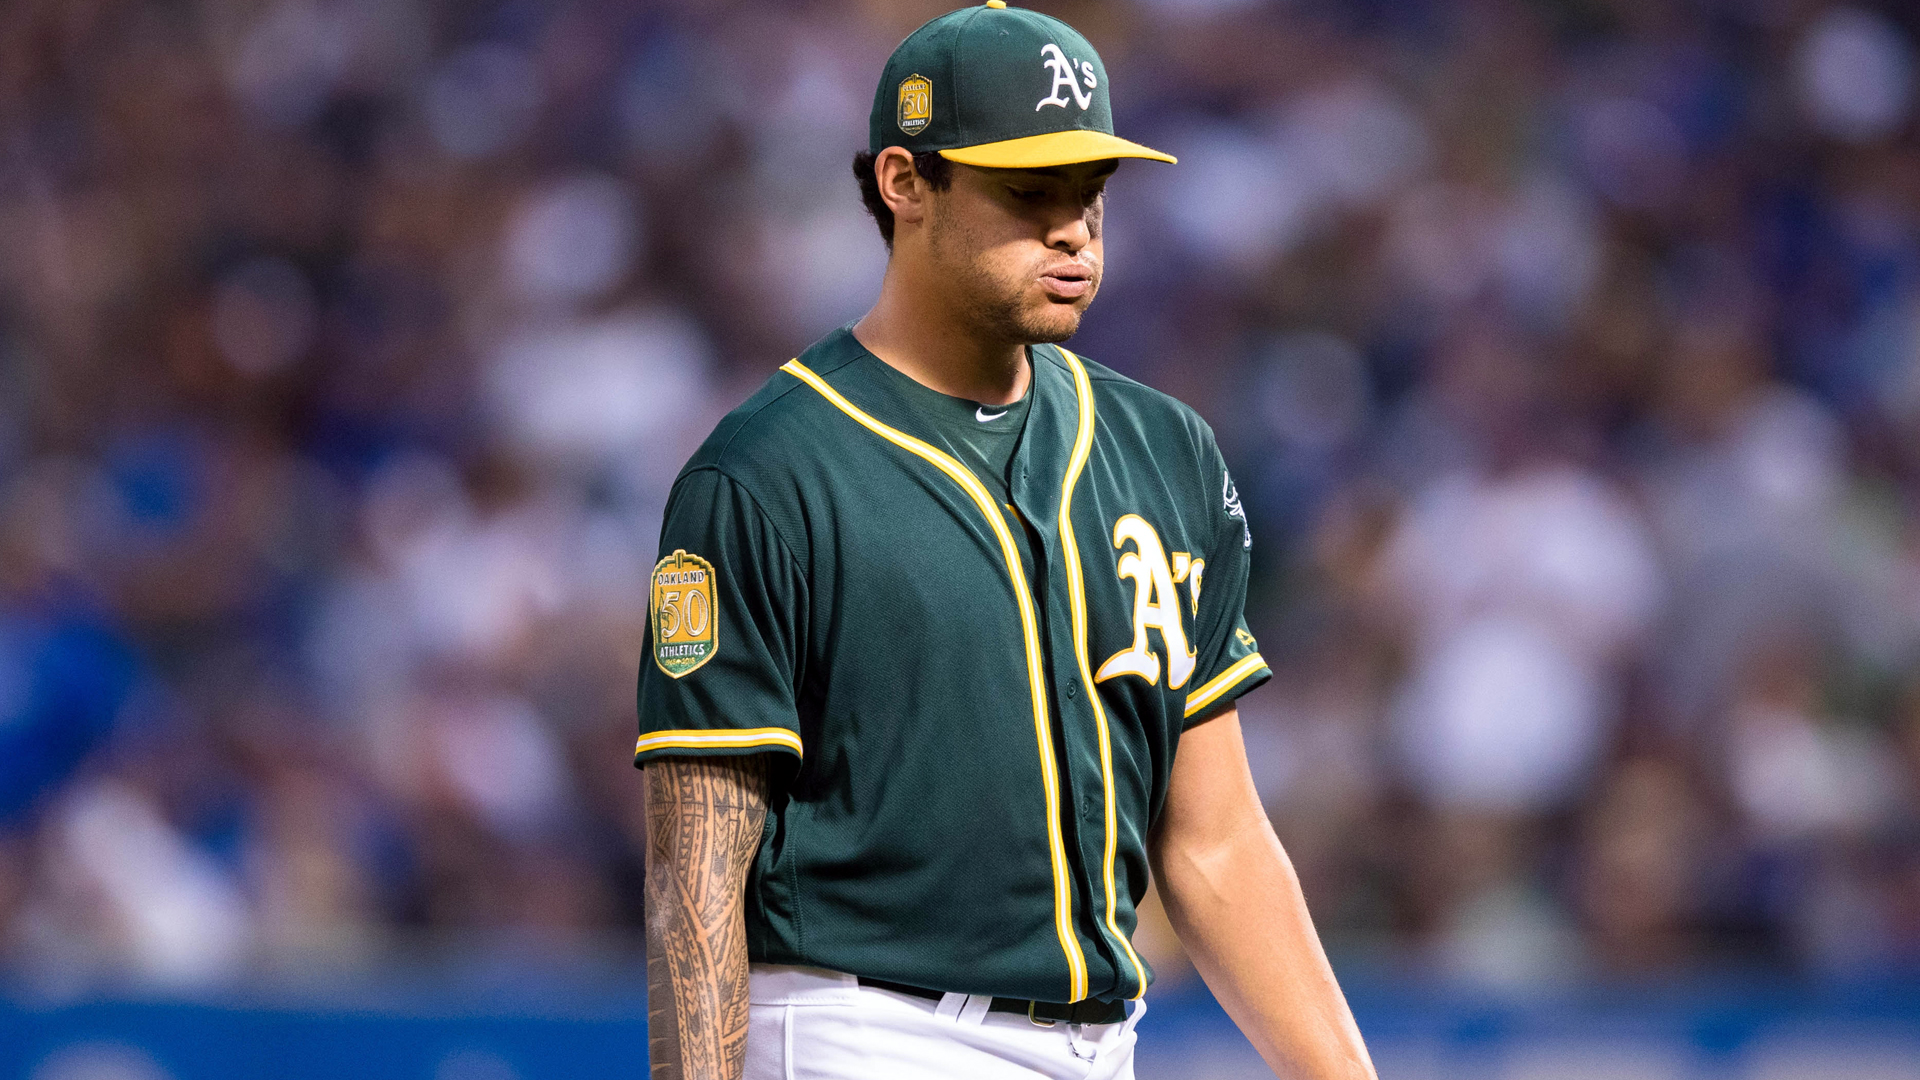 A's ace Sean Manaea to undergo shoulder surgery, likely to miss 2019